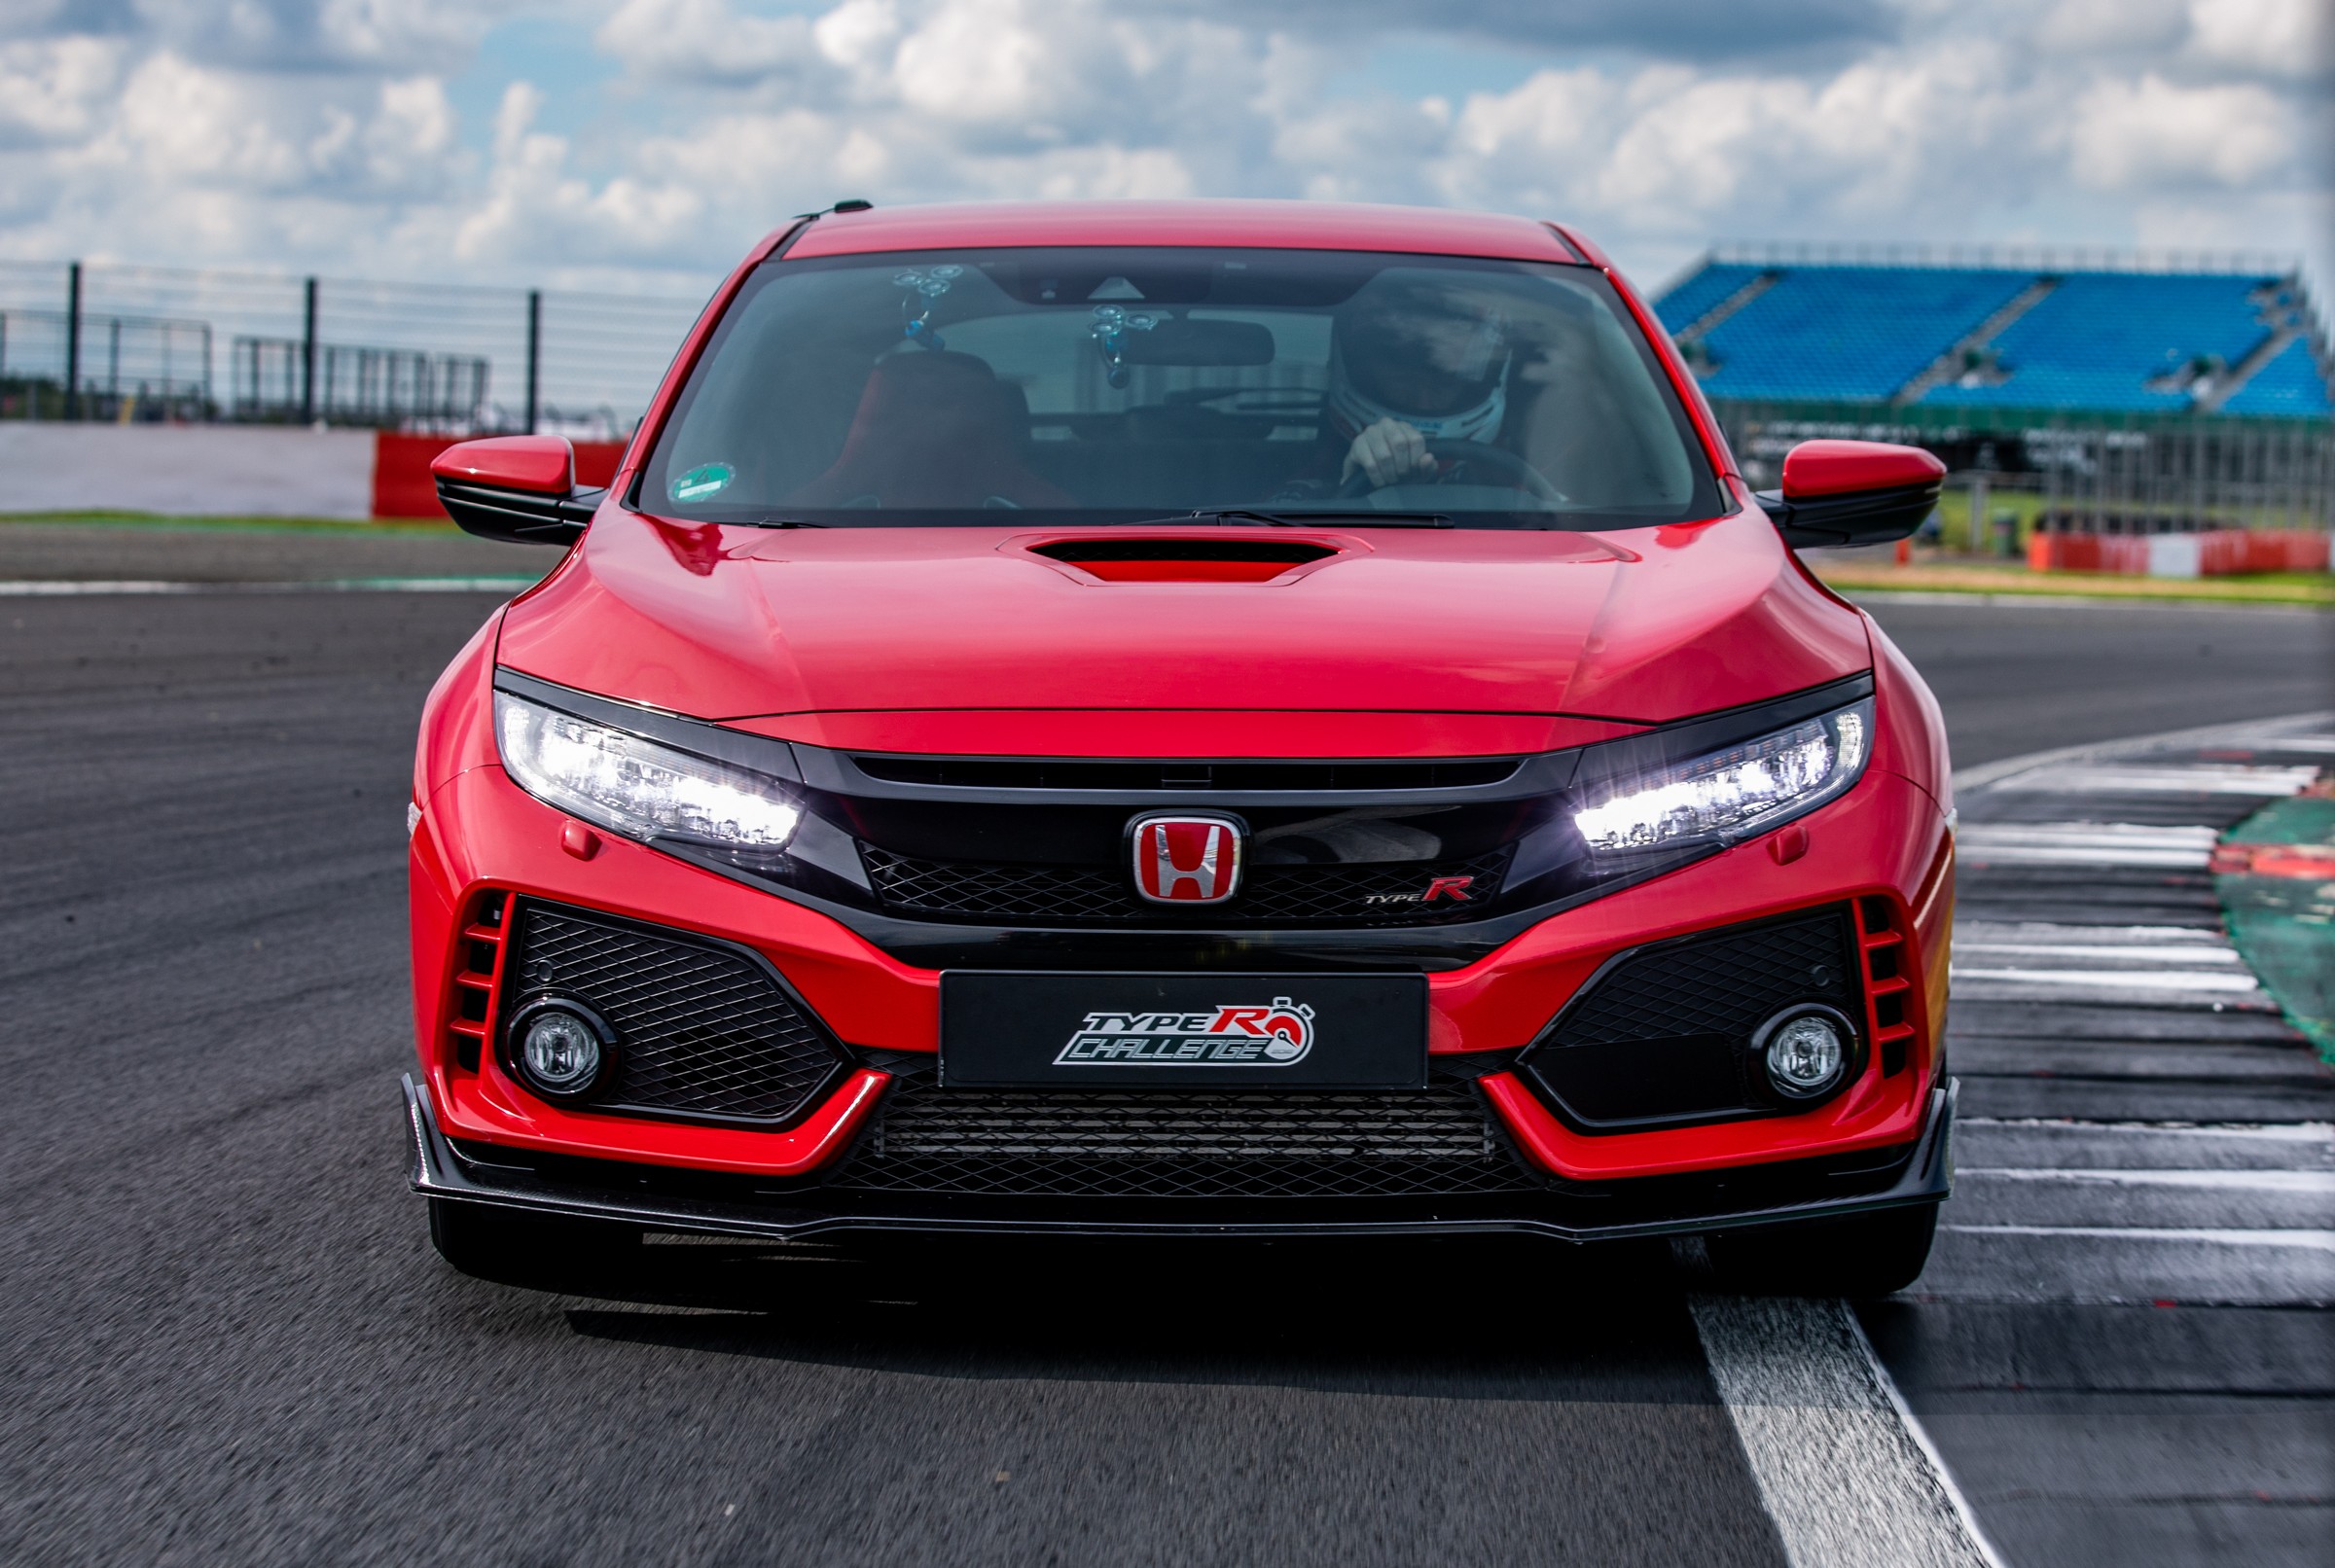 Type-R-Silverstone-Tracking-4 1